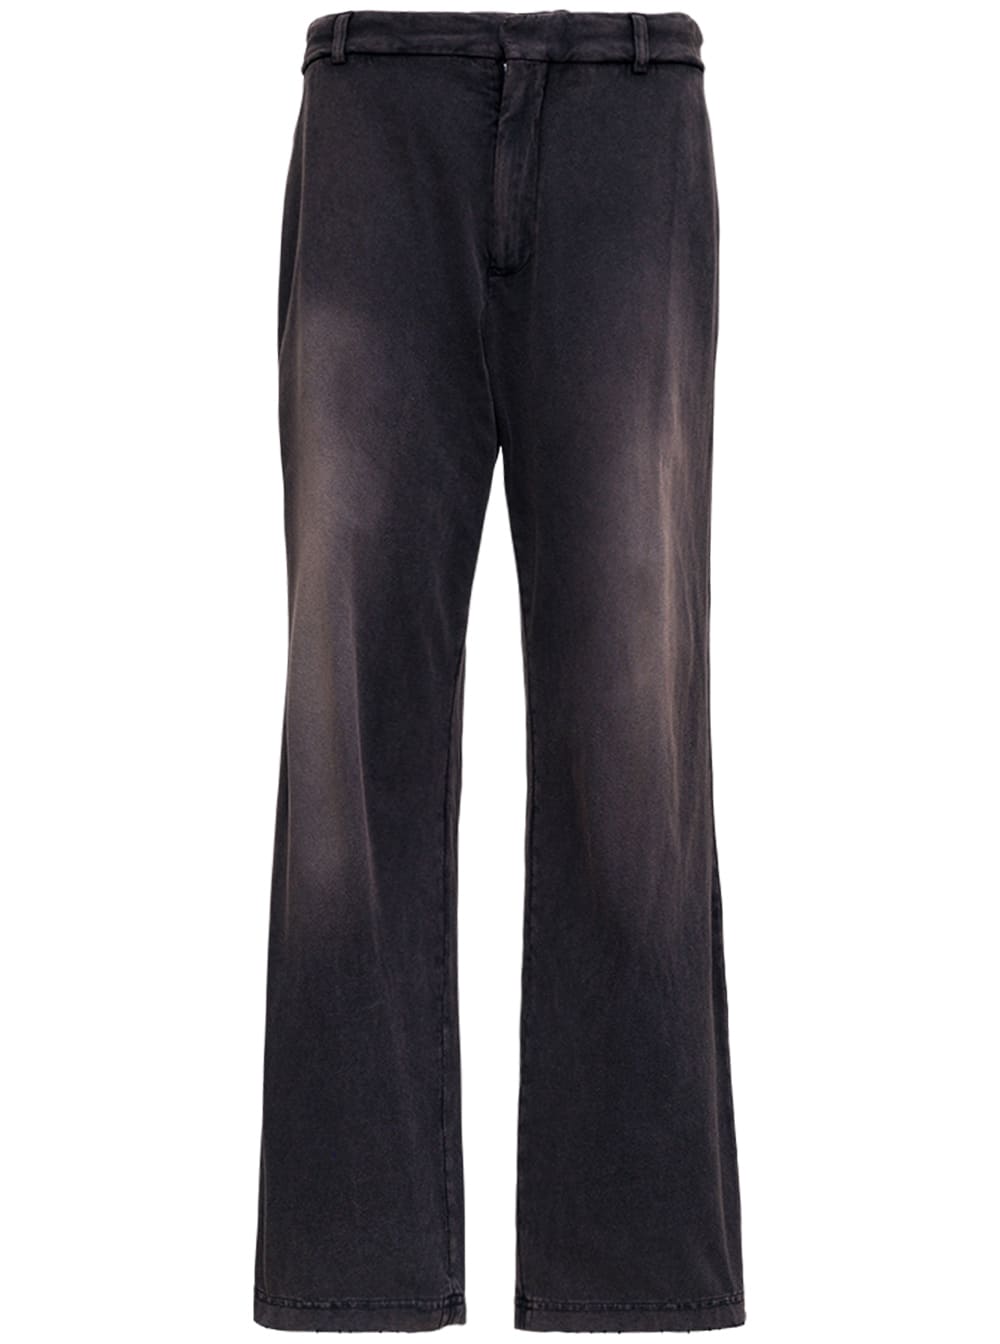 Balenciaga Slim Trousers In Black Washed Cotton